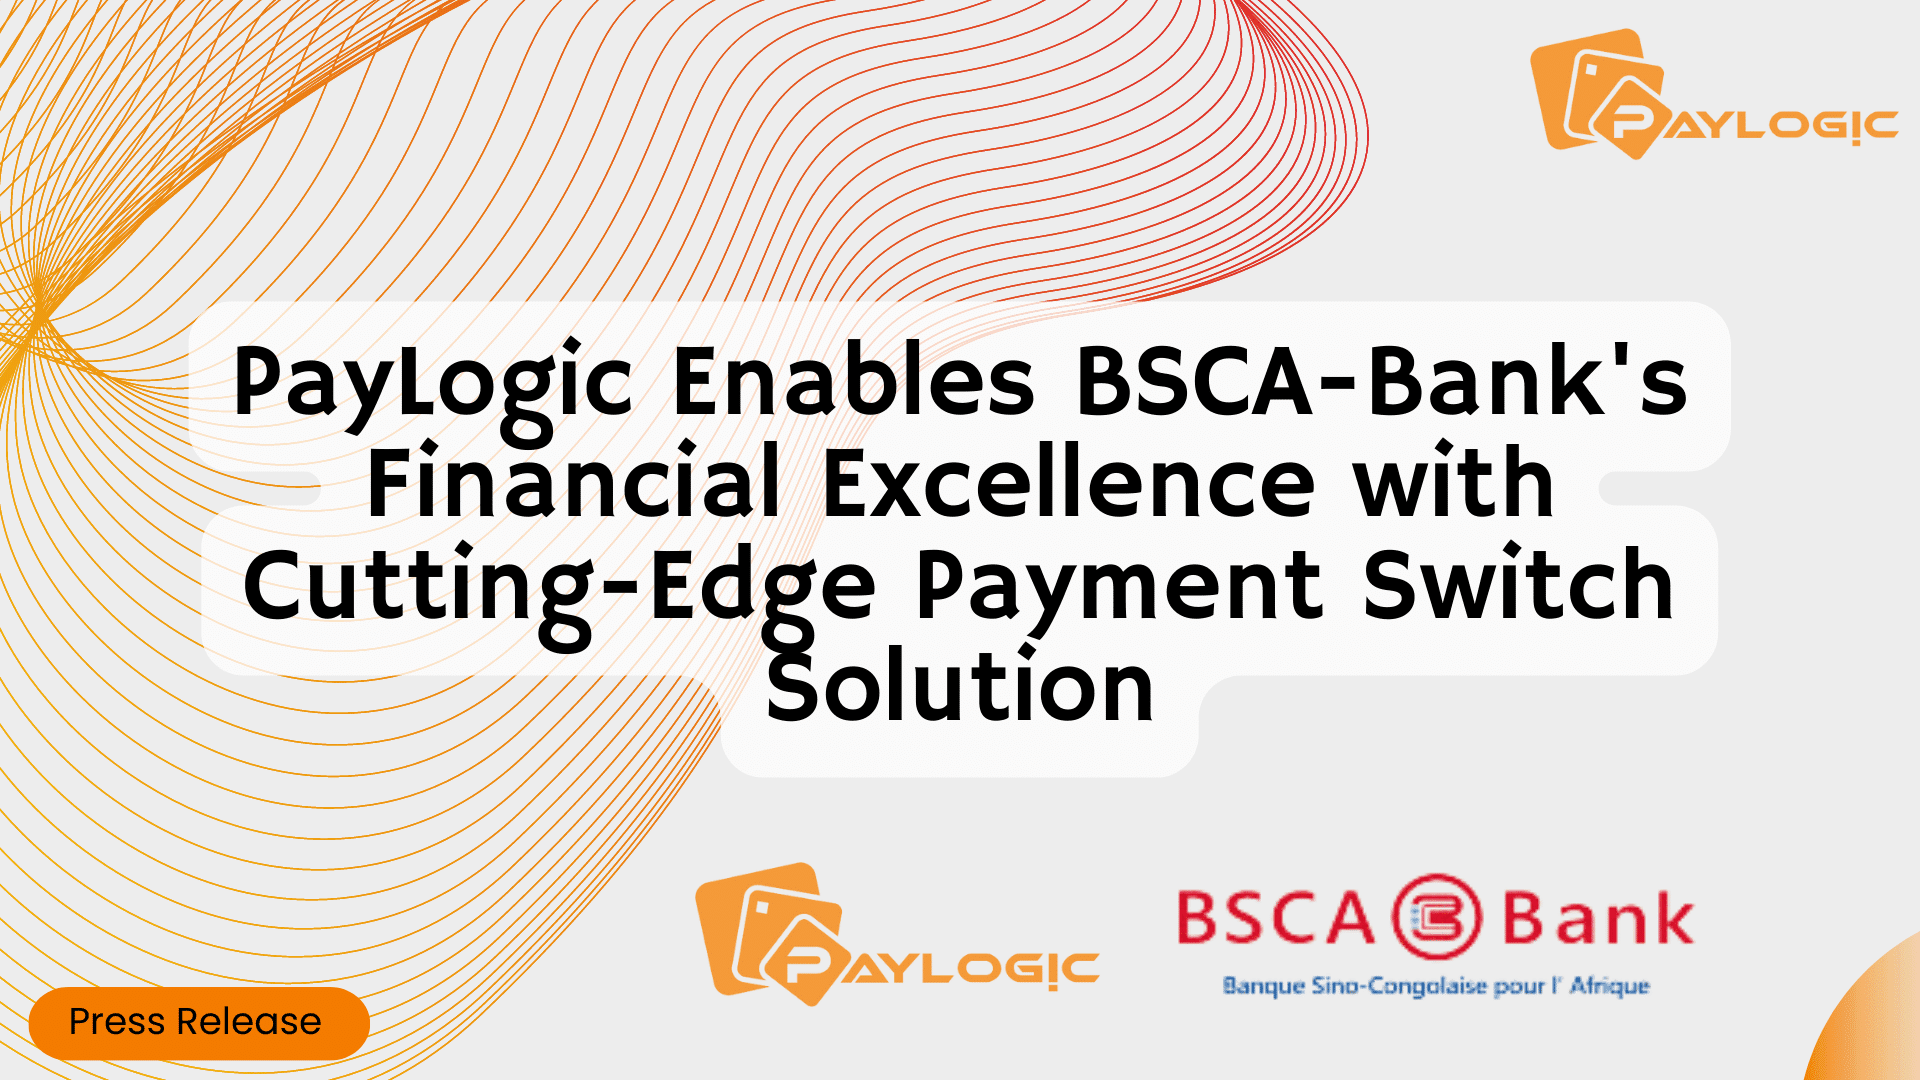 PayLogic Enables BSCA-Bank’s Financial Excellence with Cutting-Edge Payment Switch Solution